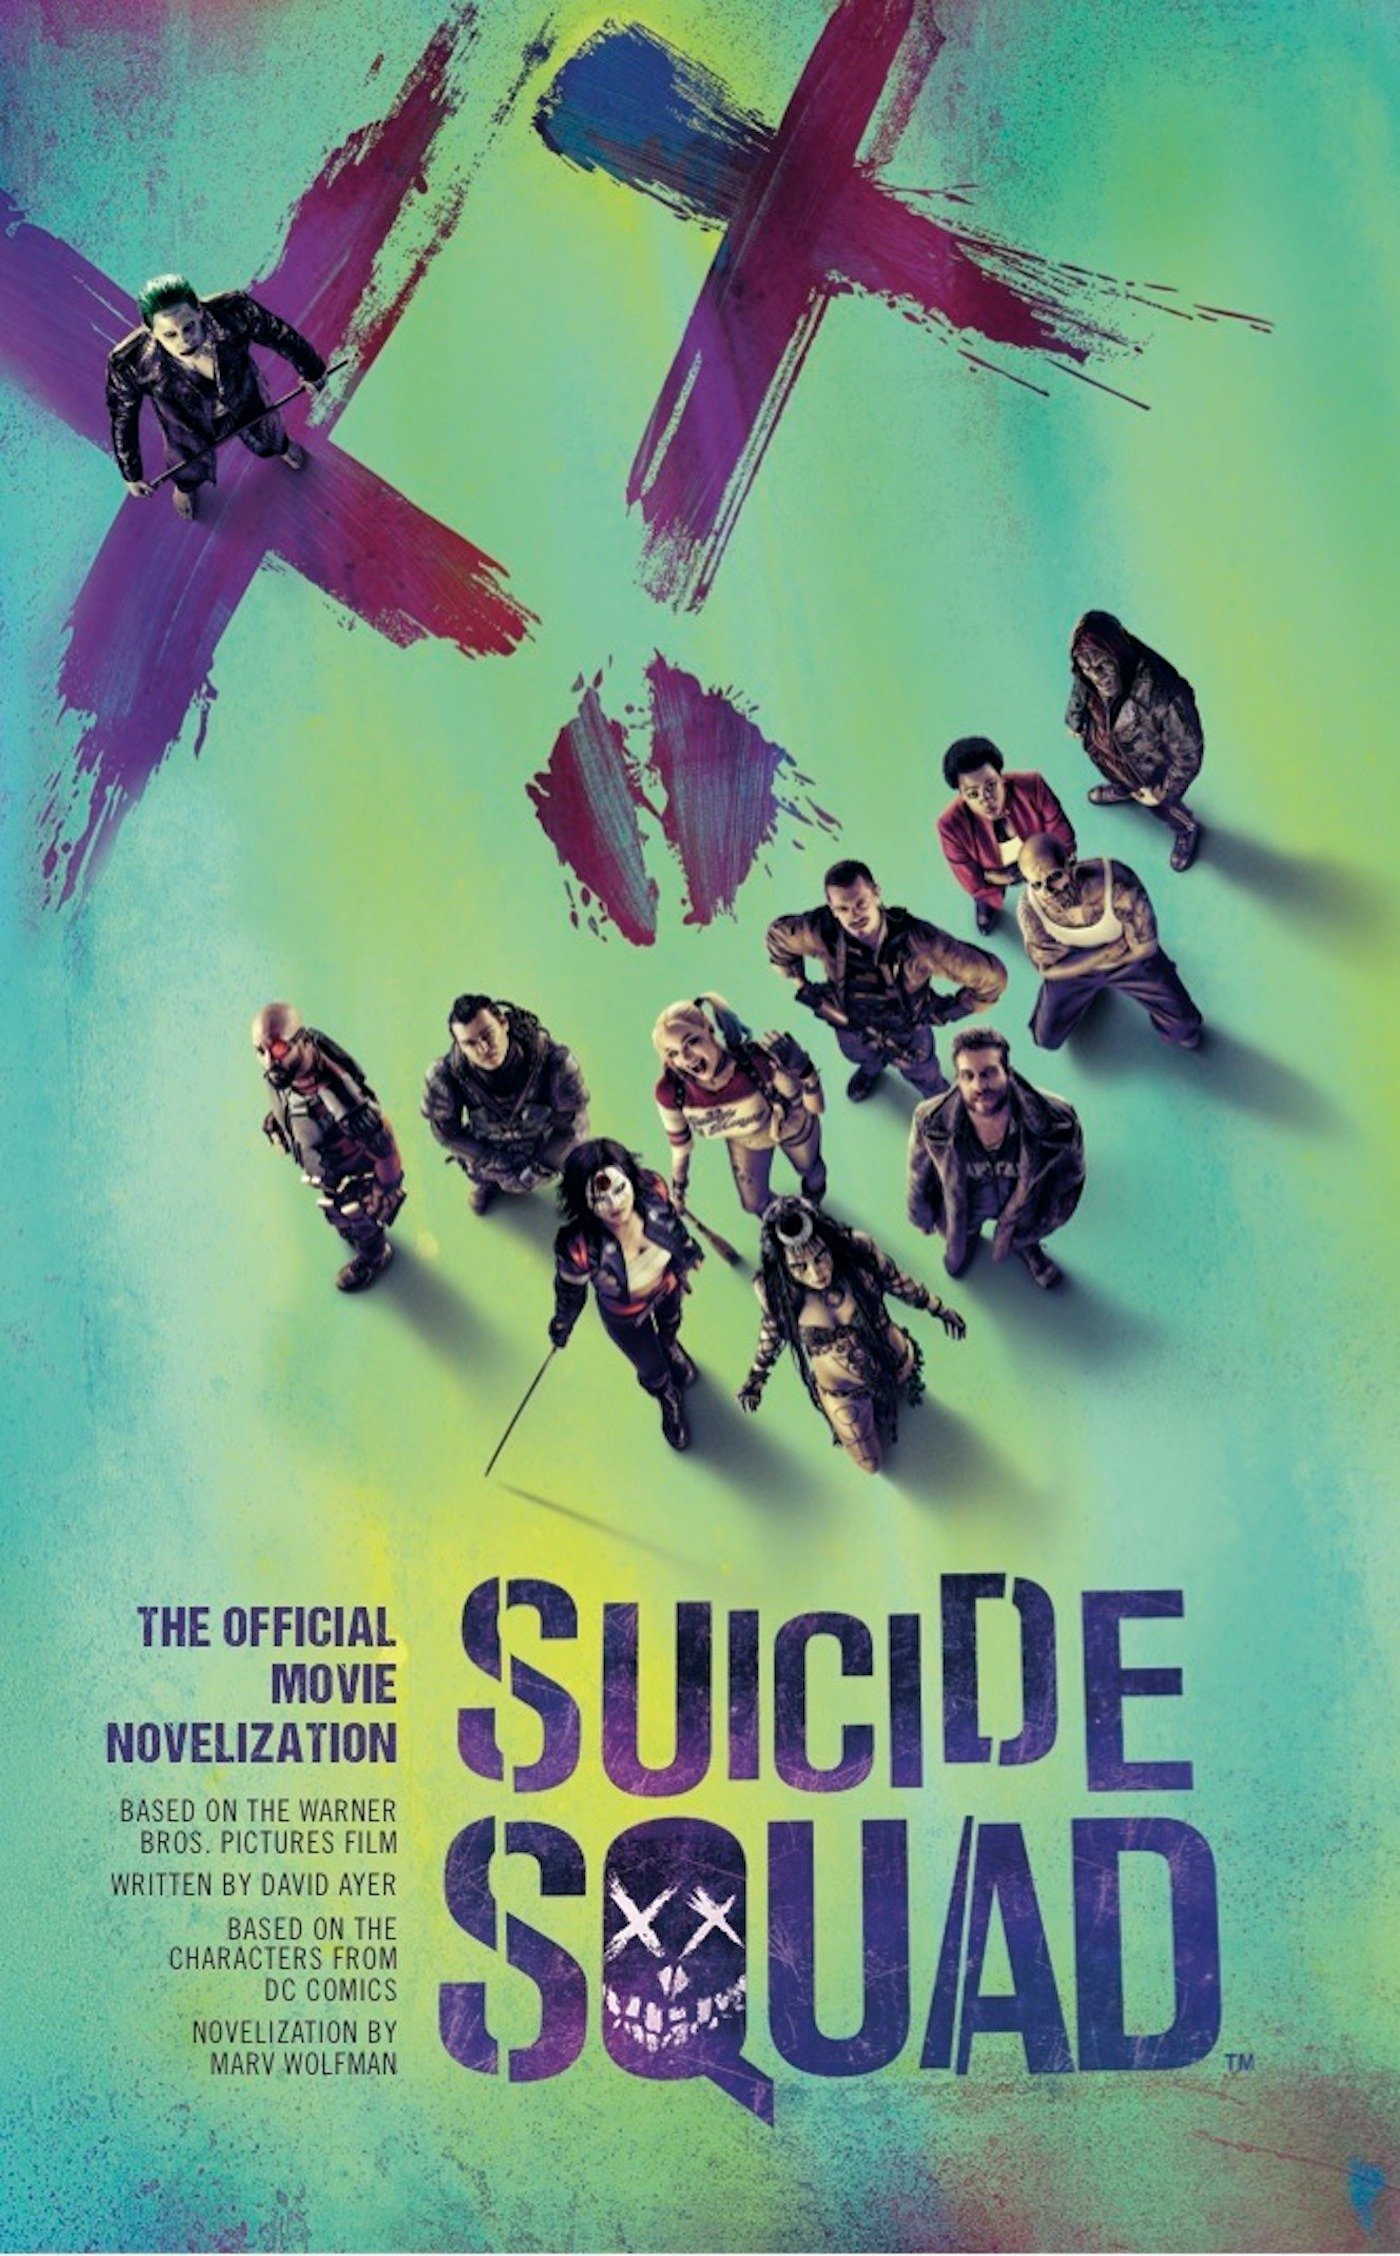 Suicide squad the official movie novelization cover image